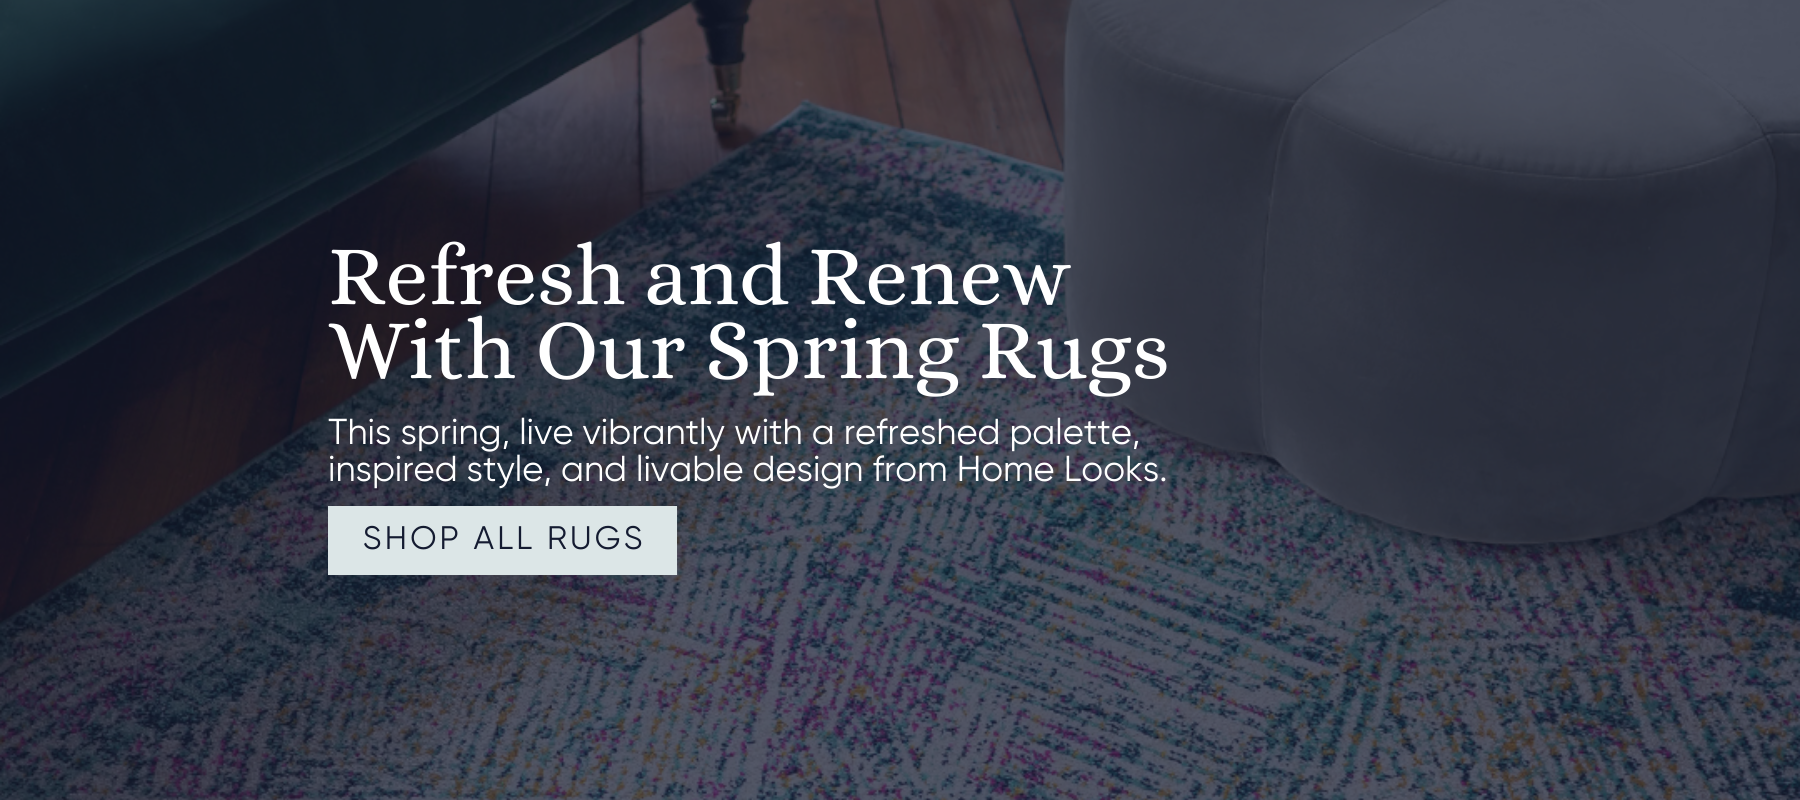 All Rugs On Sale This Spring